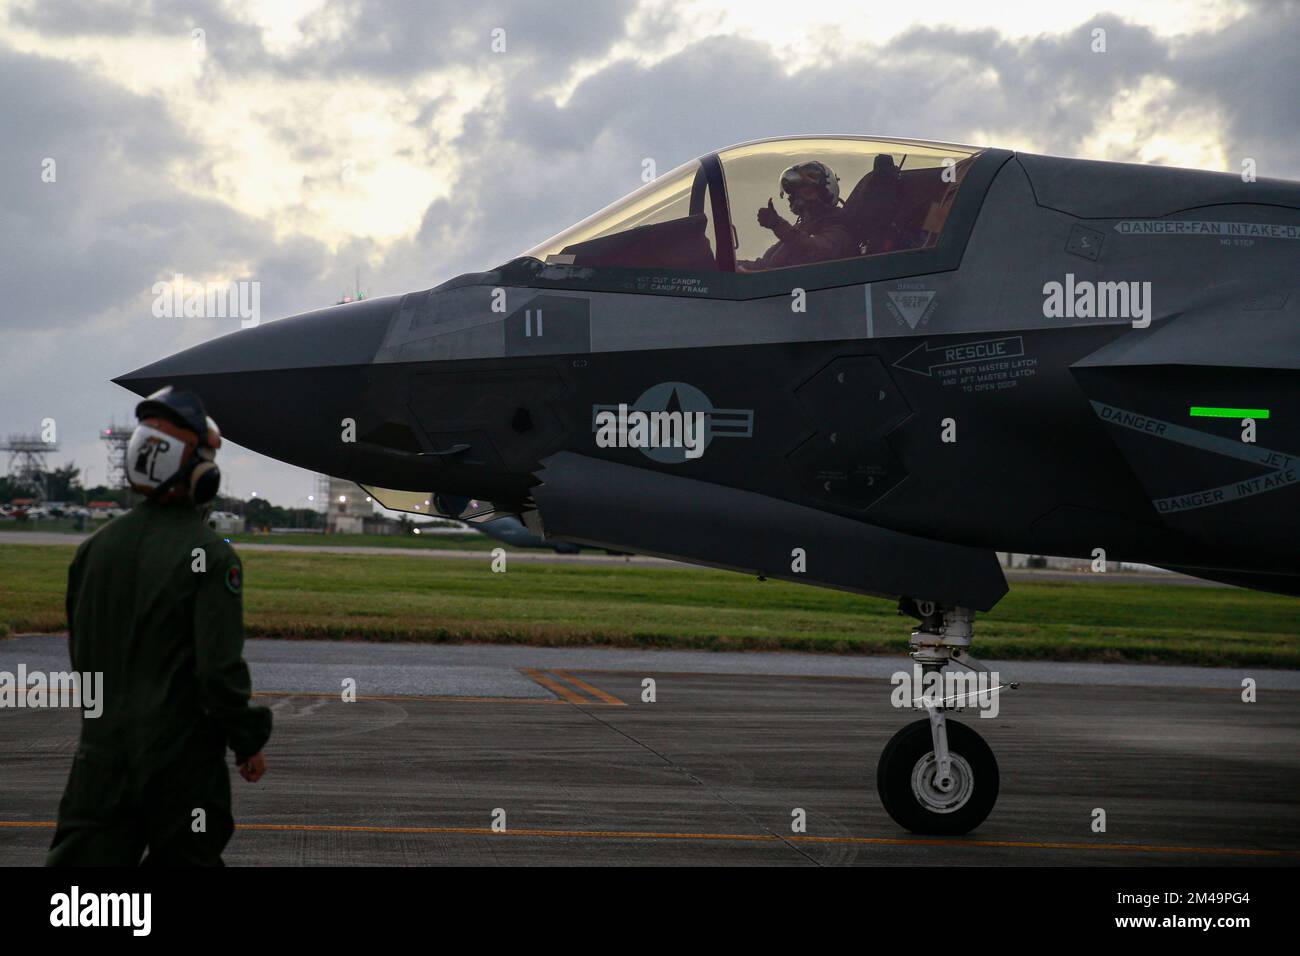 U.S. Marine Corps Cpl. Marco Cardona, an F-35B Lightning II aircraft mechanic with Marine Fighter Attack Squadron 121, guides an F-35B Lightning II aircraft for takeoff during Ryukyu Vice 23.1 at Kadena Air Base, Okinawa, Japan, Dec. 13, 2022. Ryukyu Vice is a joint, fixed-wing aviation command and control exercise that provides critical training to 1st Marine Aircraft Wing tactical air control personnel through offensive, defensive and counter-air live-flight scenarios. (U.S. Marine Corps photo by Lance Cpl. Samantha Rodriguez) Stock Photo